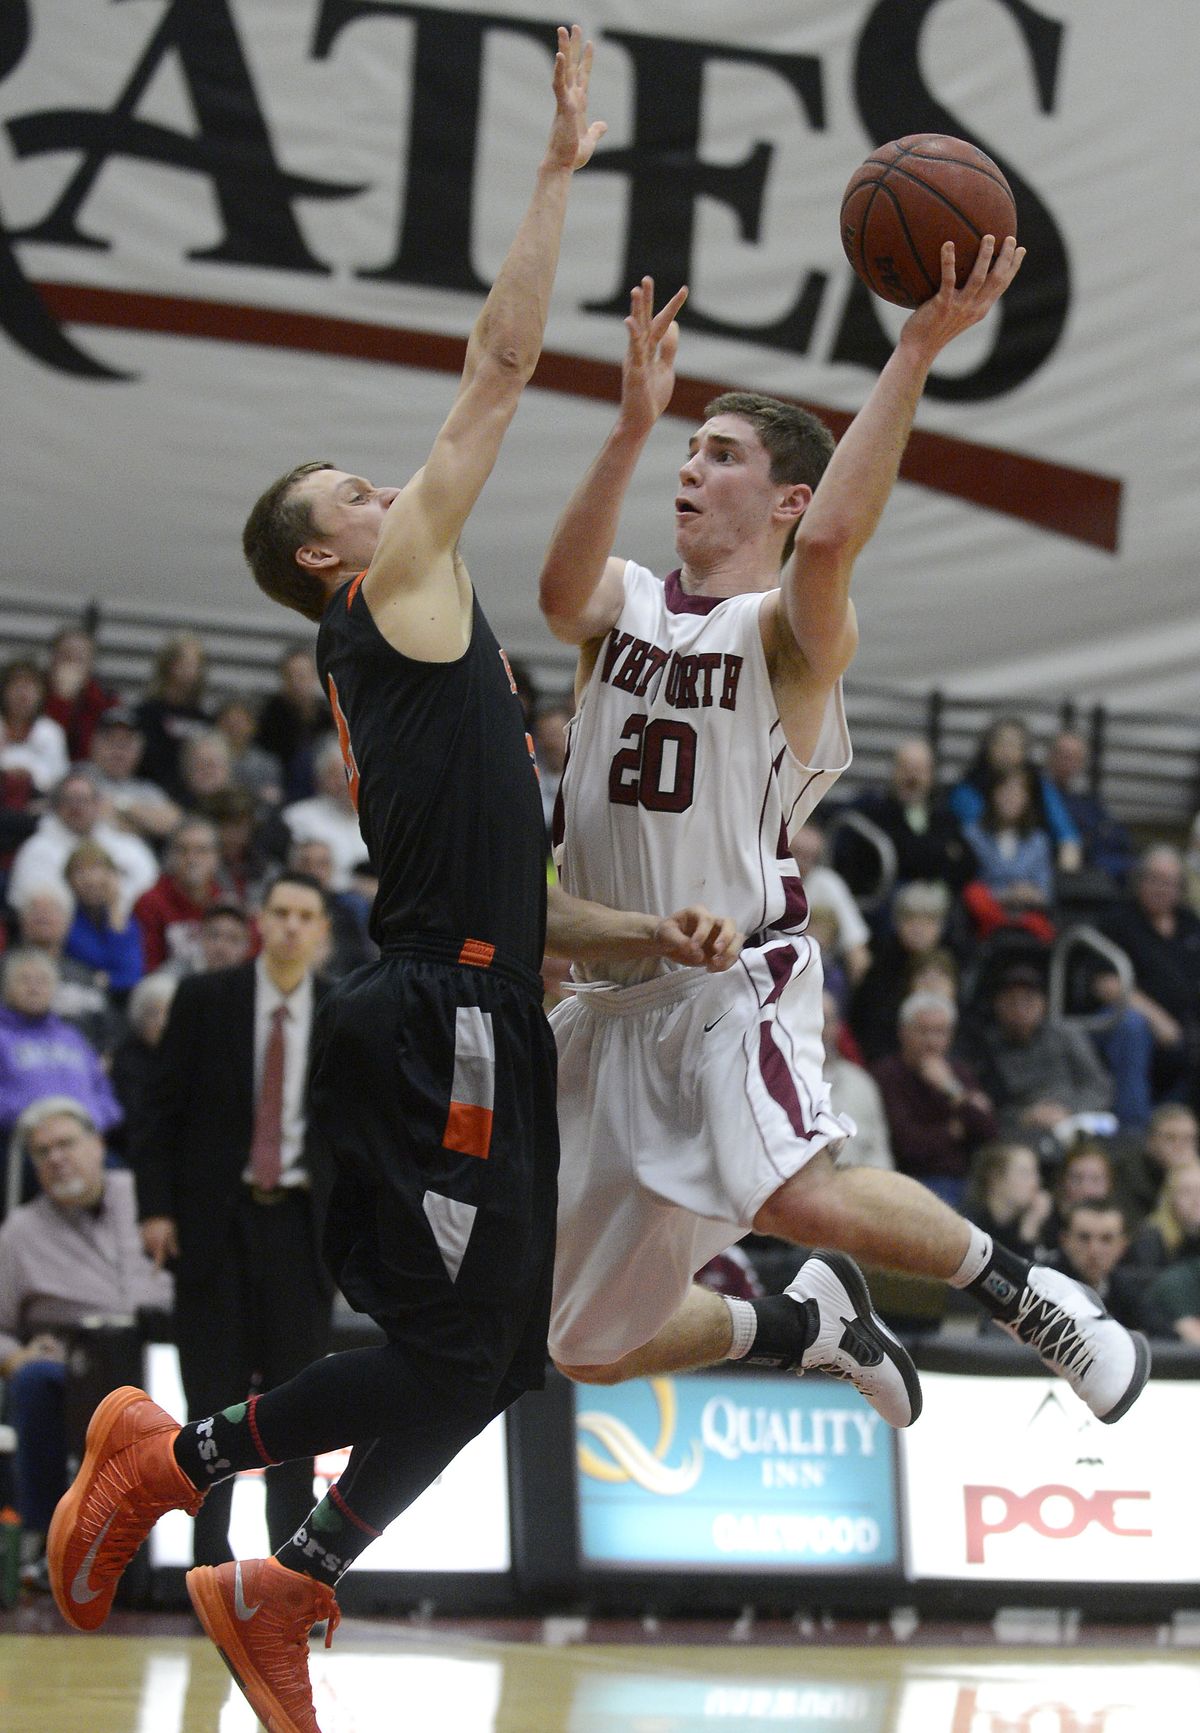 Colton McCargar, right, averages double figures in scoring despite coming off the bench. (Colin Mulvany)